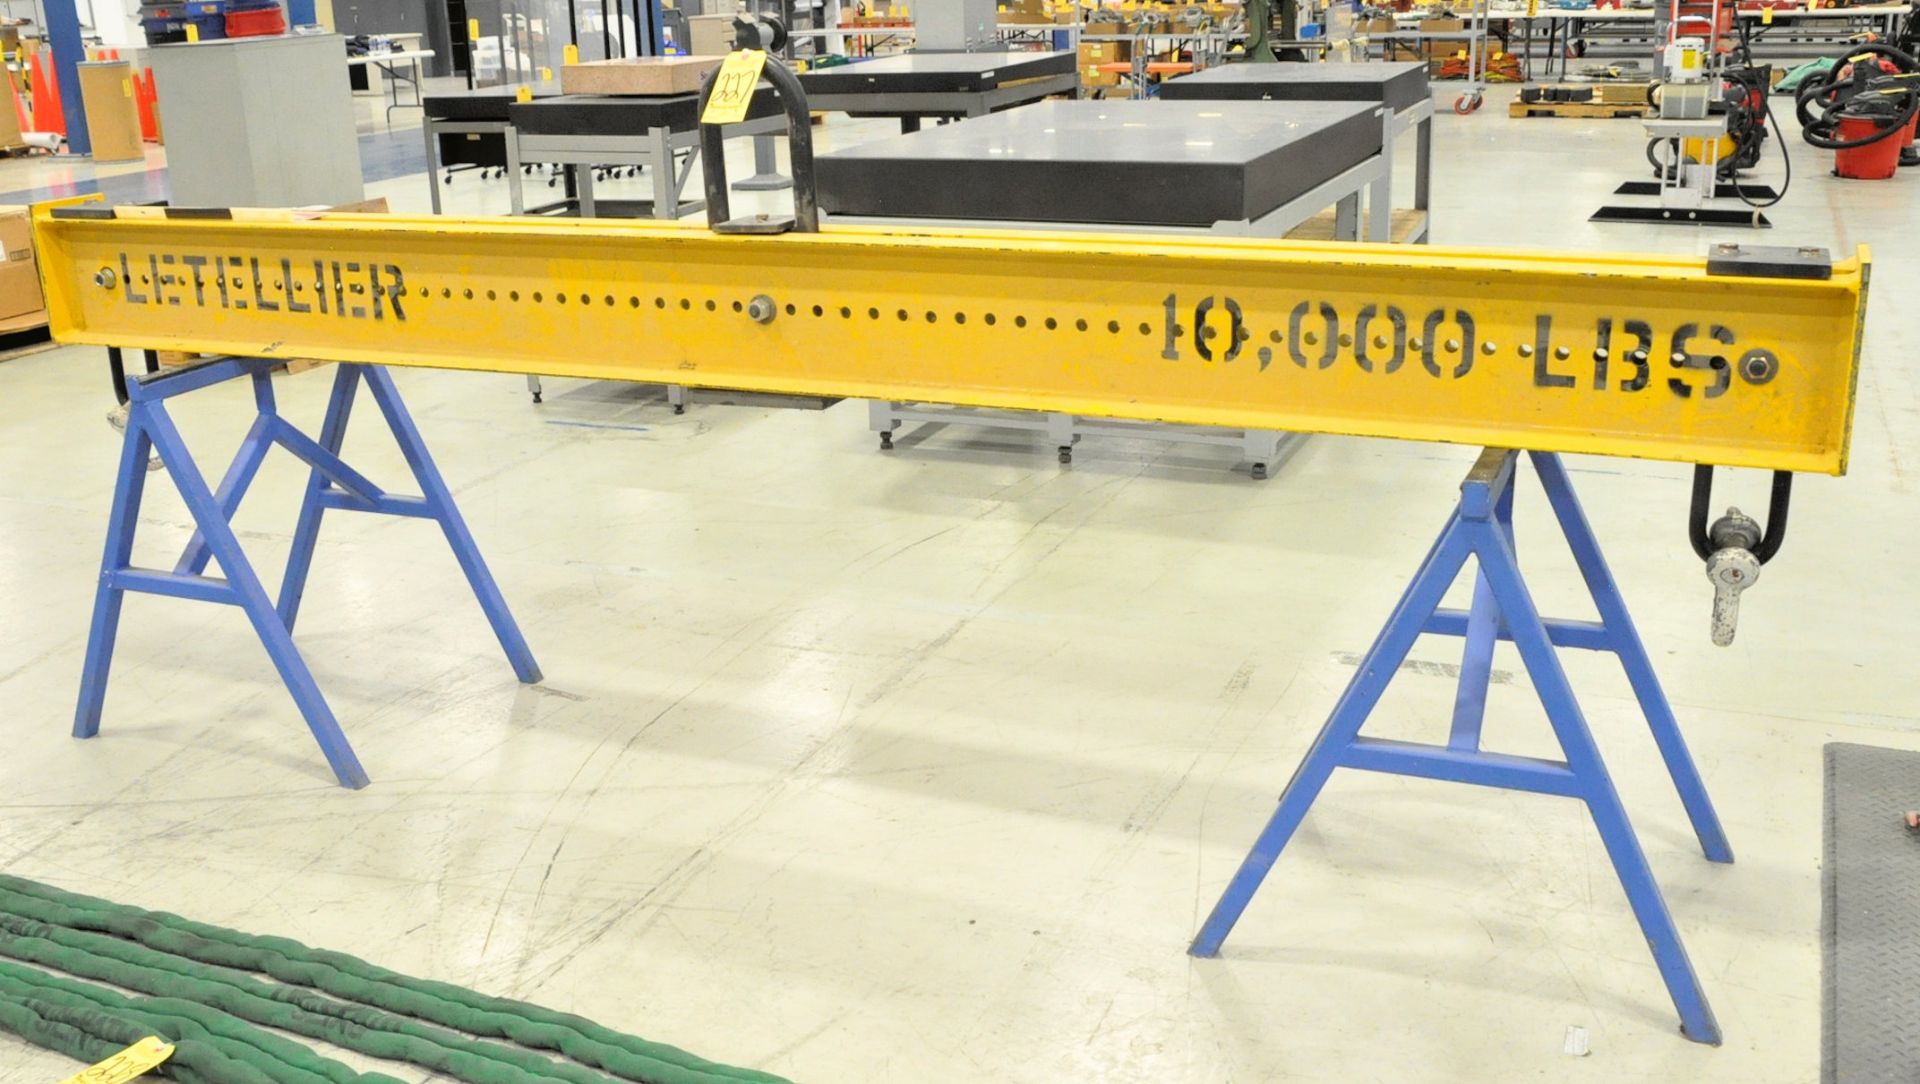 Letellier 10,000-Lbs. x 10' Overhead Crane Spreader Bar, S/n N/a, with Steel Work Horse Stands